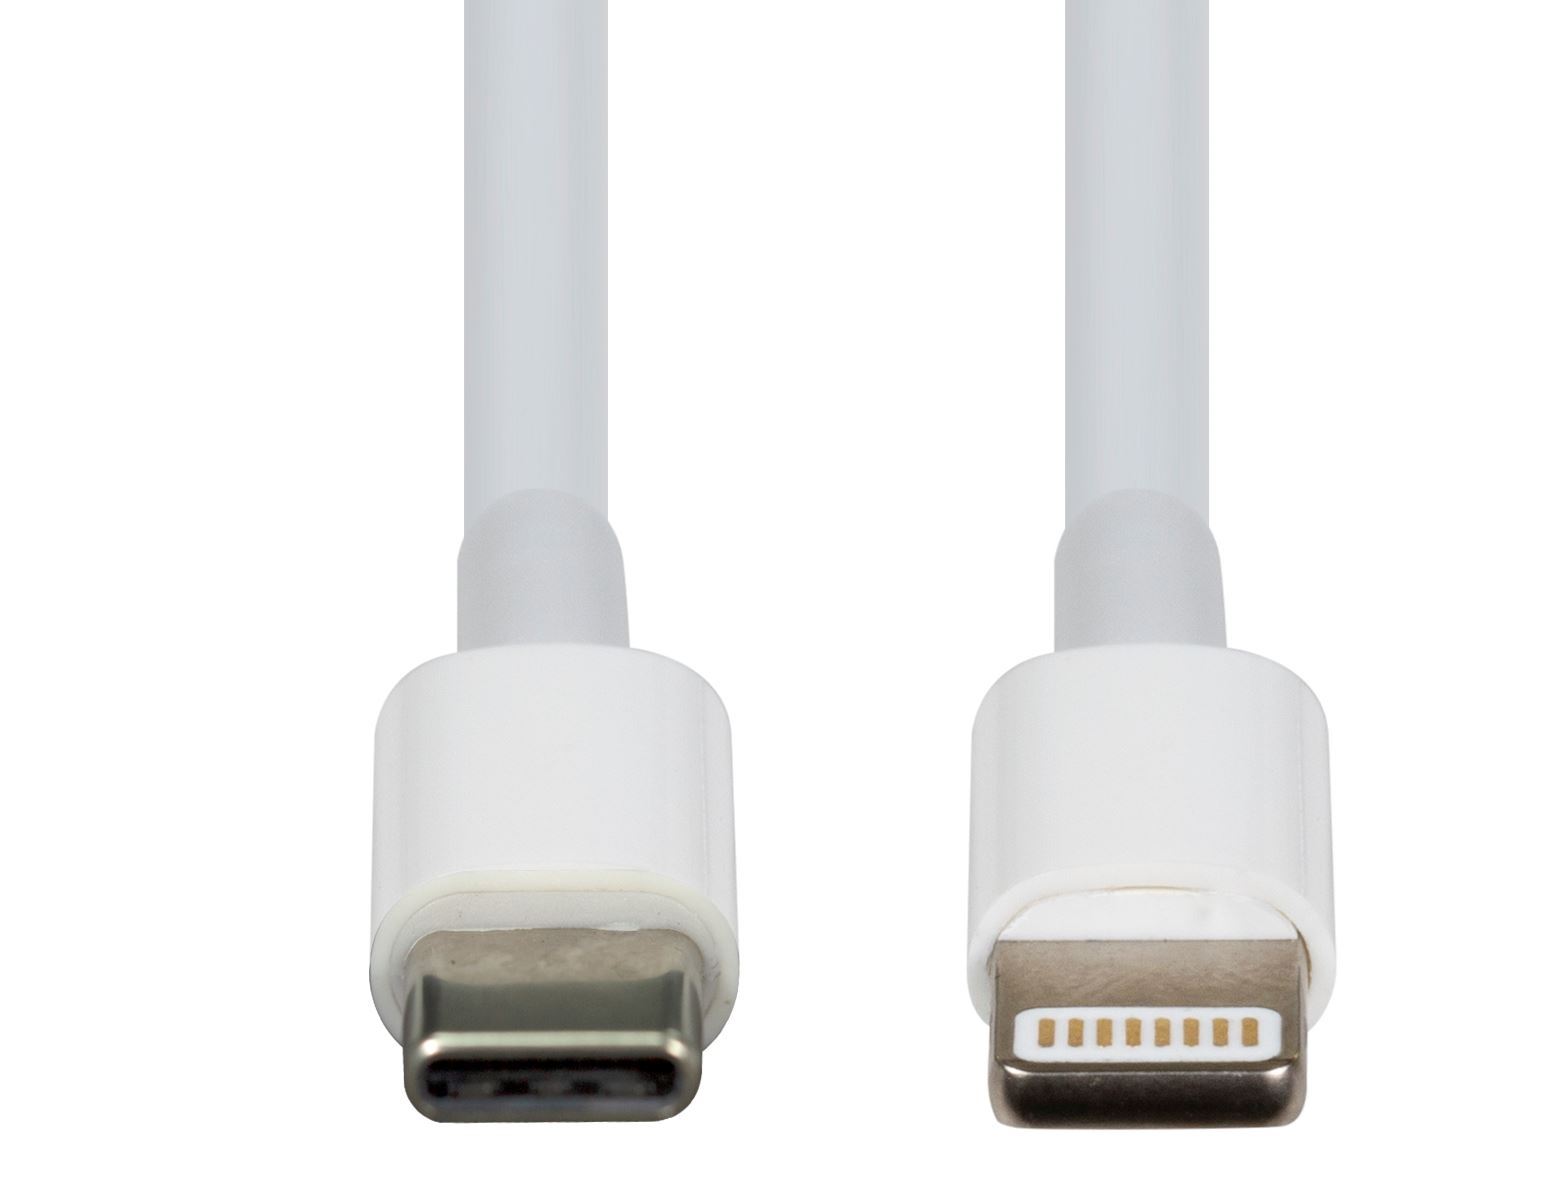 DYNAMIX_3m_USB-C_to_Lightning_Charge_&_Sync_Cable._For_Apple_iPhone,_iPad,_iPad_mini_&_iPods_*Not_MFI_Certified* 941